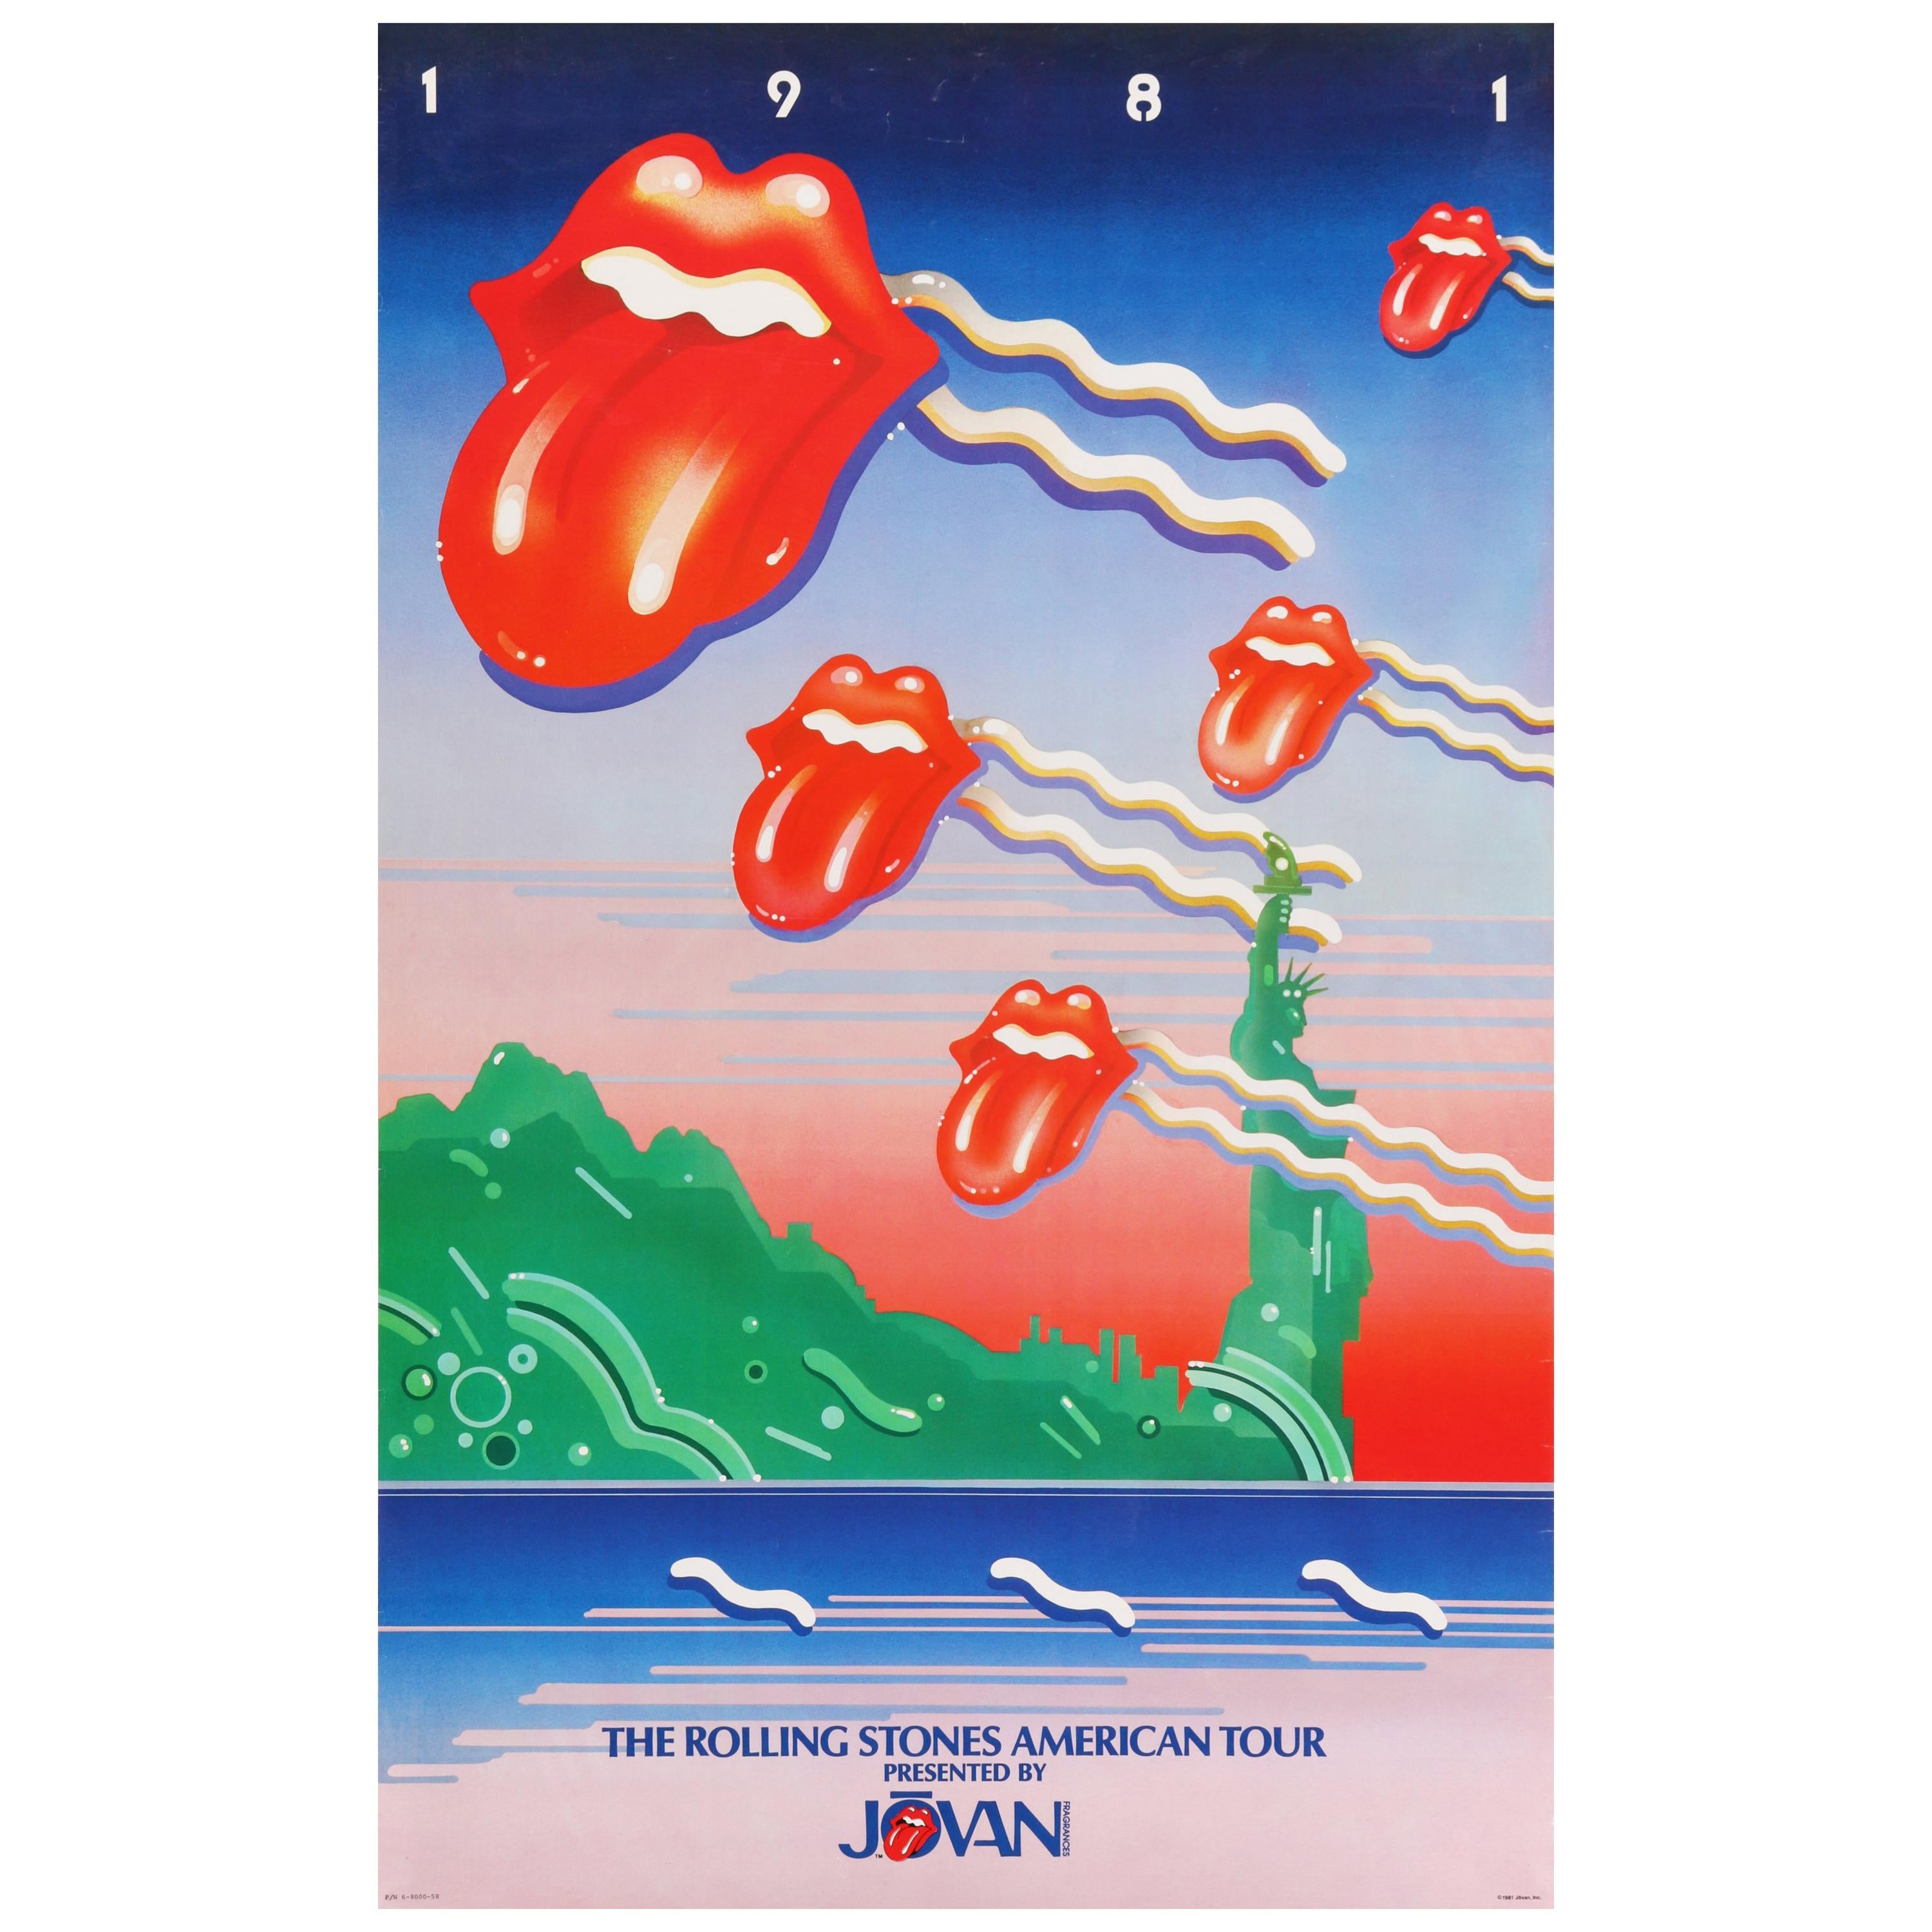 The Rolling Stones Original Vintage Tour Poster, American, 1981